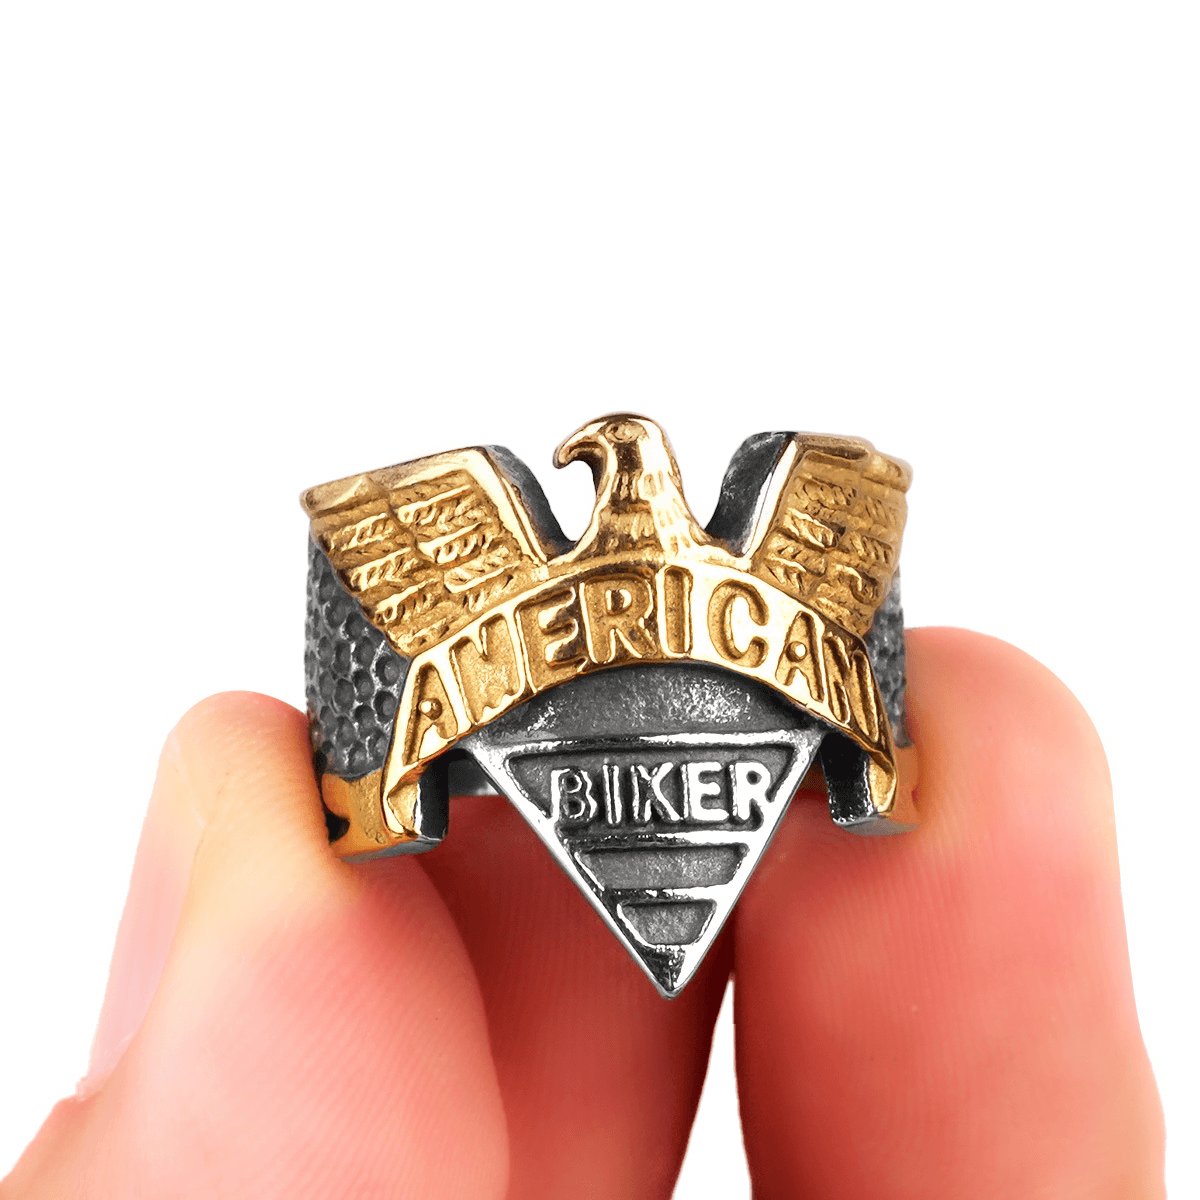 American Biker Eagle Ring / Stainless Steel Rock Fashion / Personality Signet Jewelry - HARD'N'HEAVY